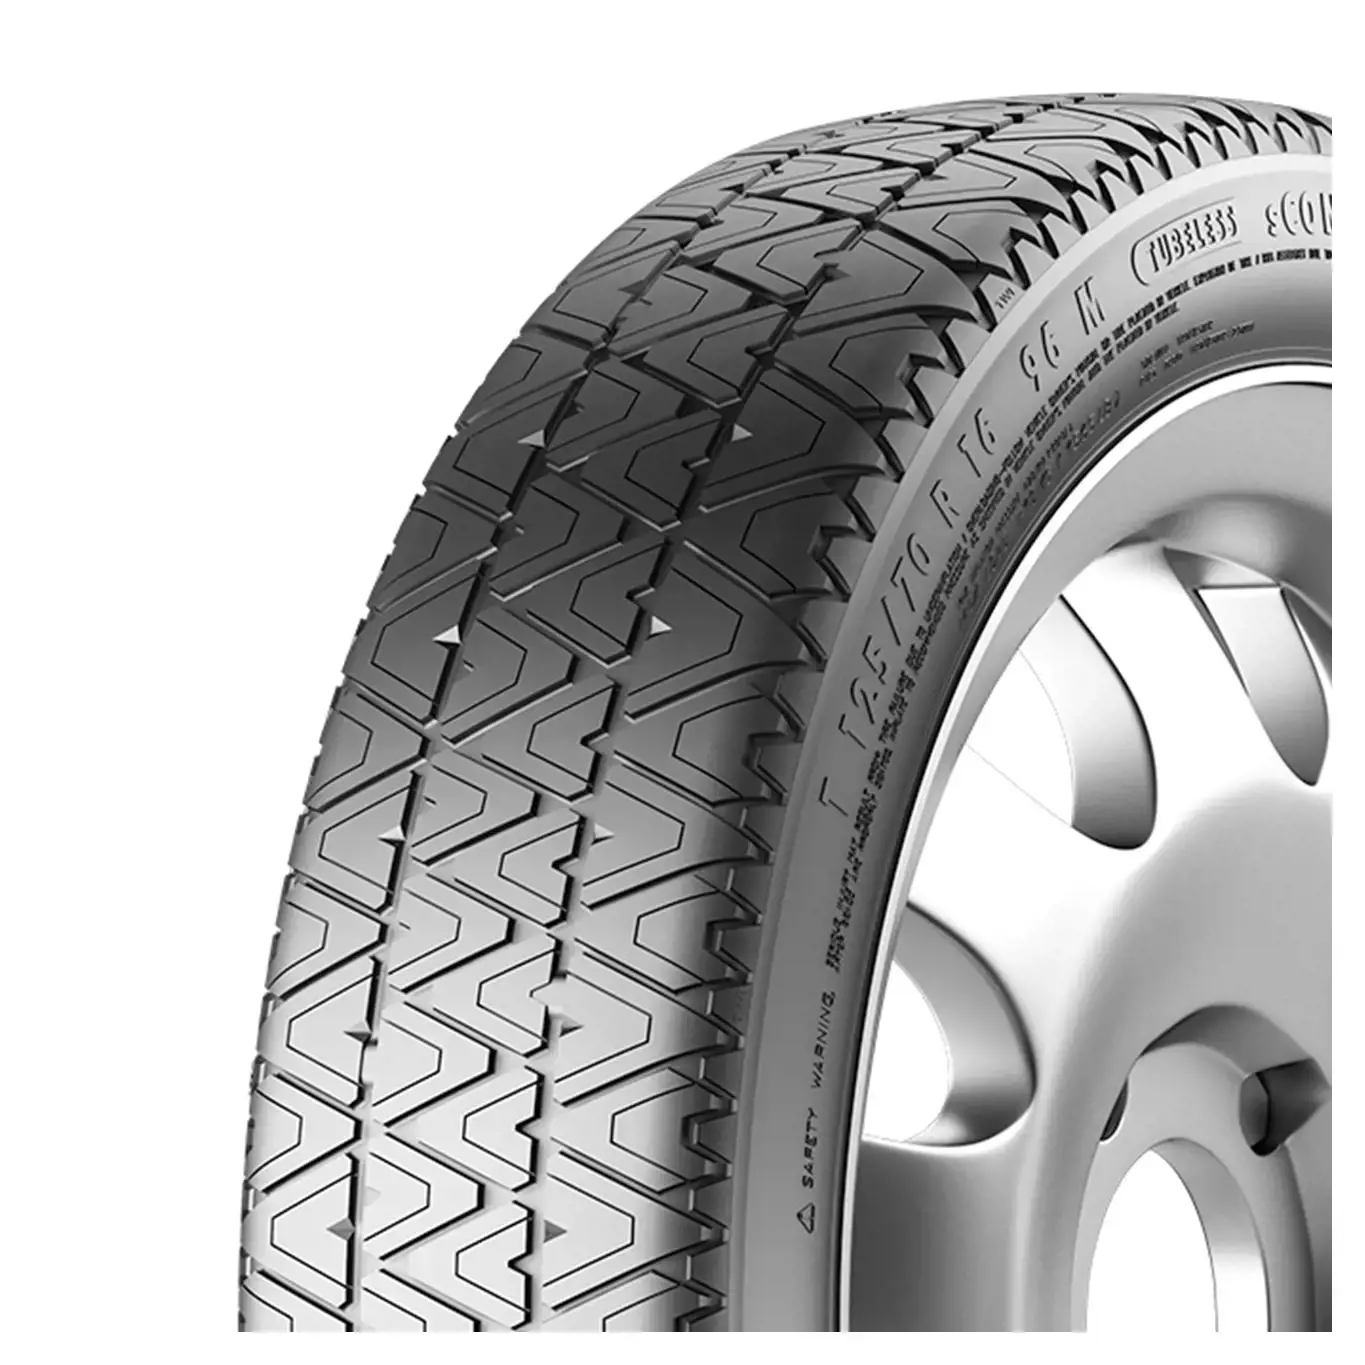 T115/95 R17 95M sContact